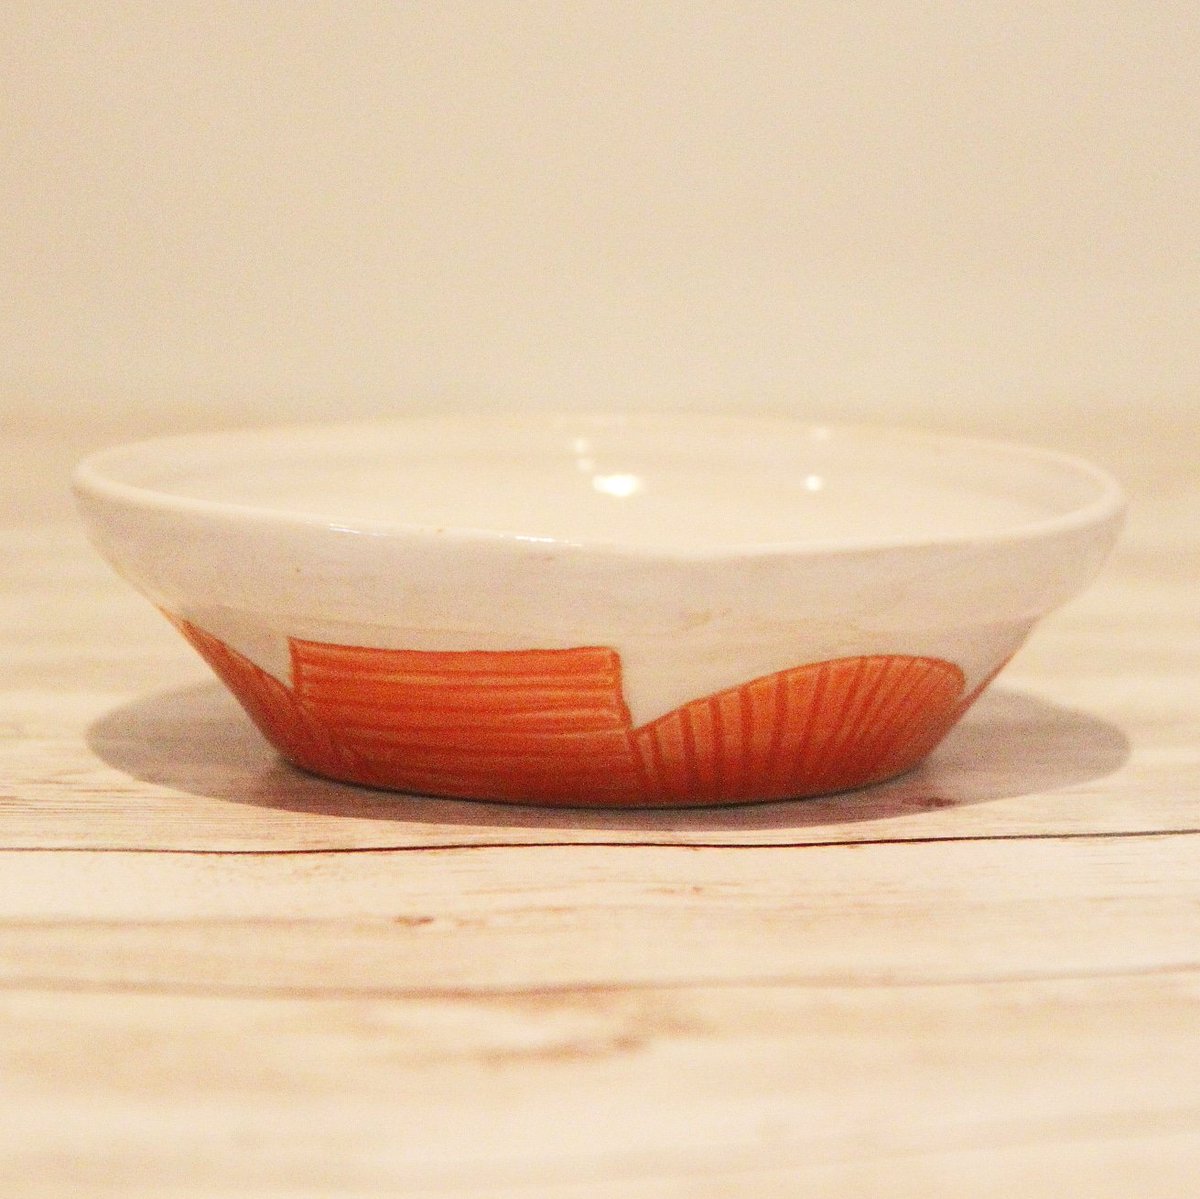 SOLD Incised small dish with vibrant orange glaze. More pieces are available in the shop (link in bio)
#edoyleceramics #ceramics #pottery #handmade #ceramicsmagazine #ceramiclicious #ceramicreview  #britishceramics #dish #orange #orangeseries #patternseries #pattern #incised #art